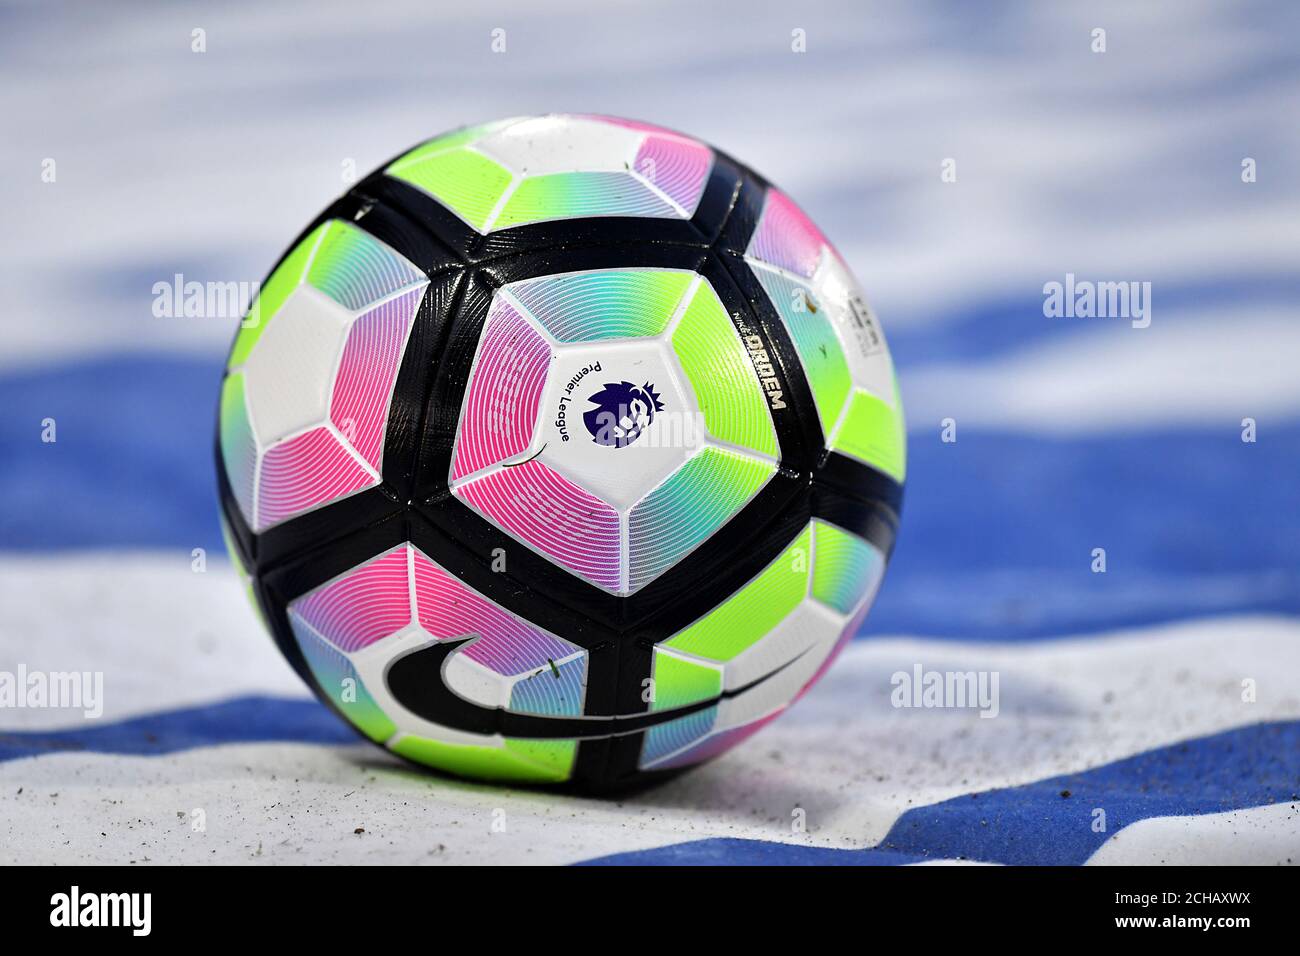 A view of the Official Nike Ordem Premier League match ball Stock Photo -  Alamy